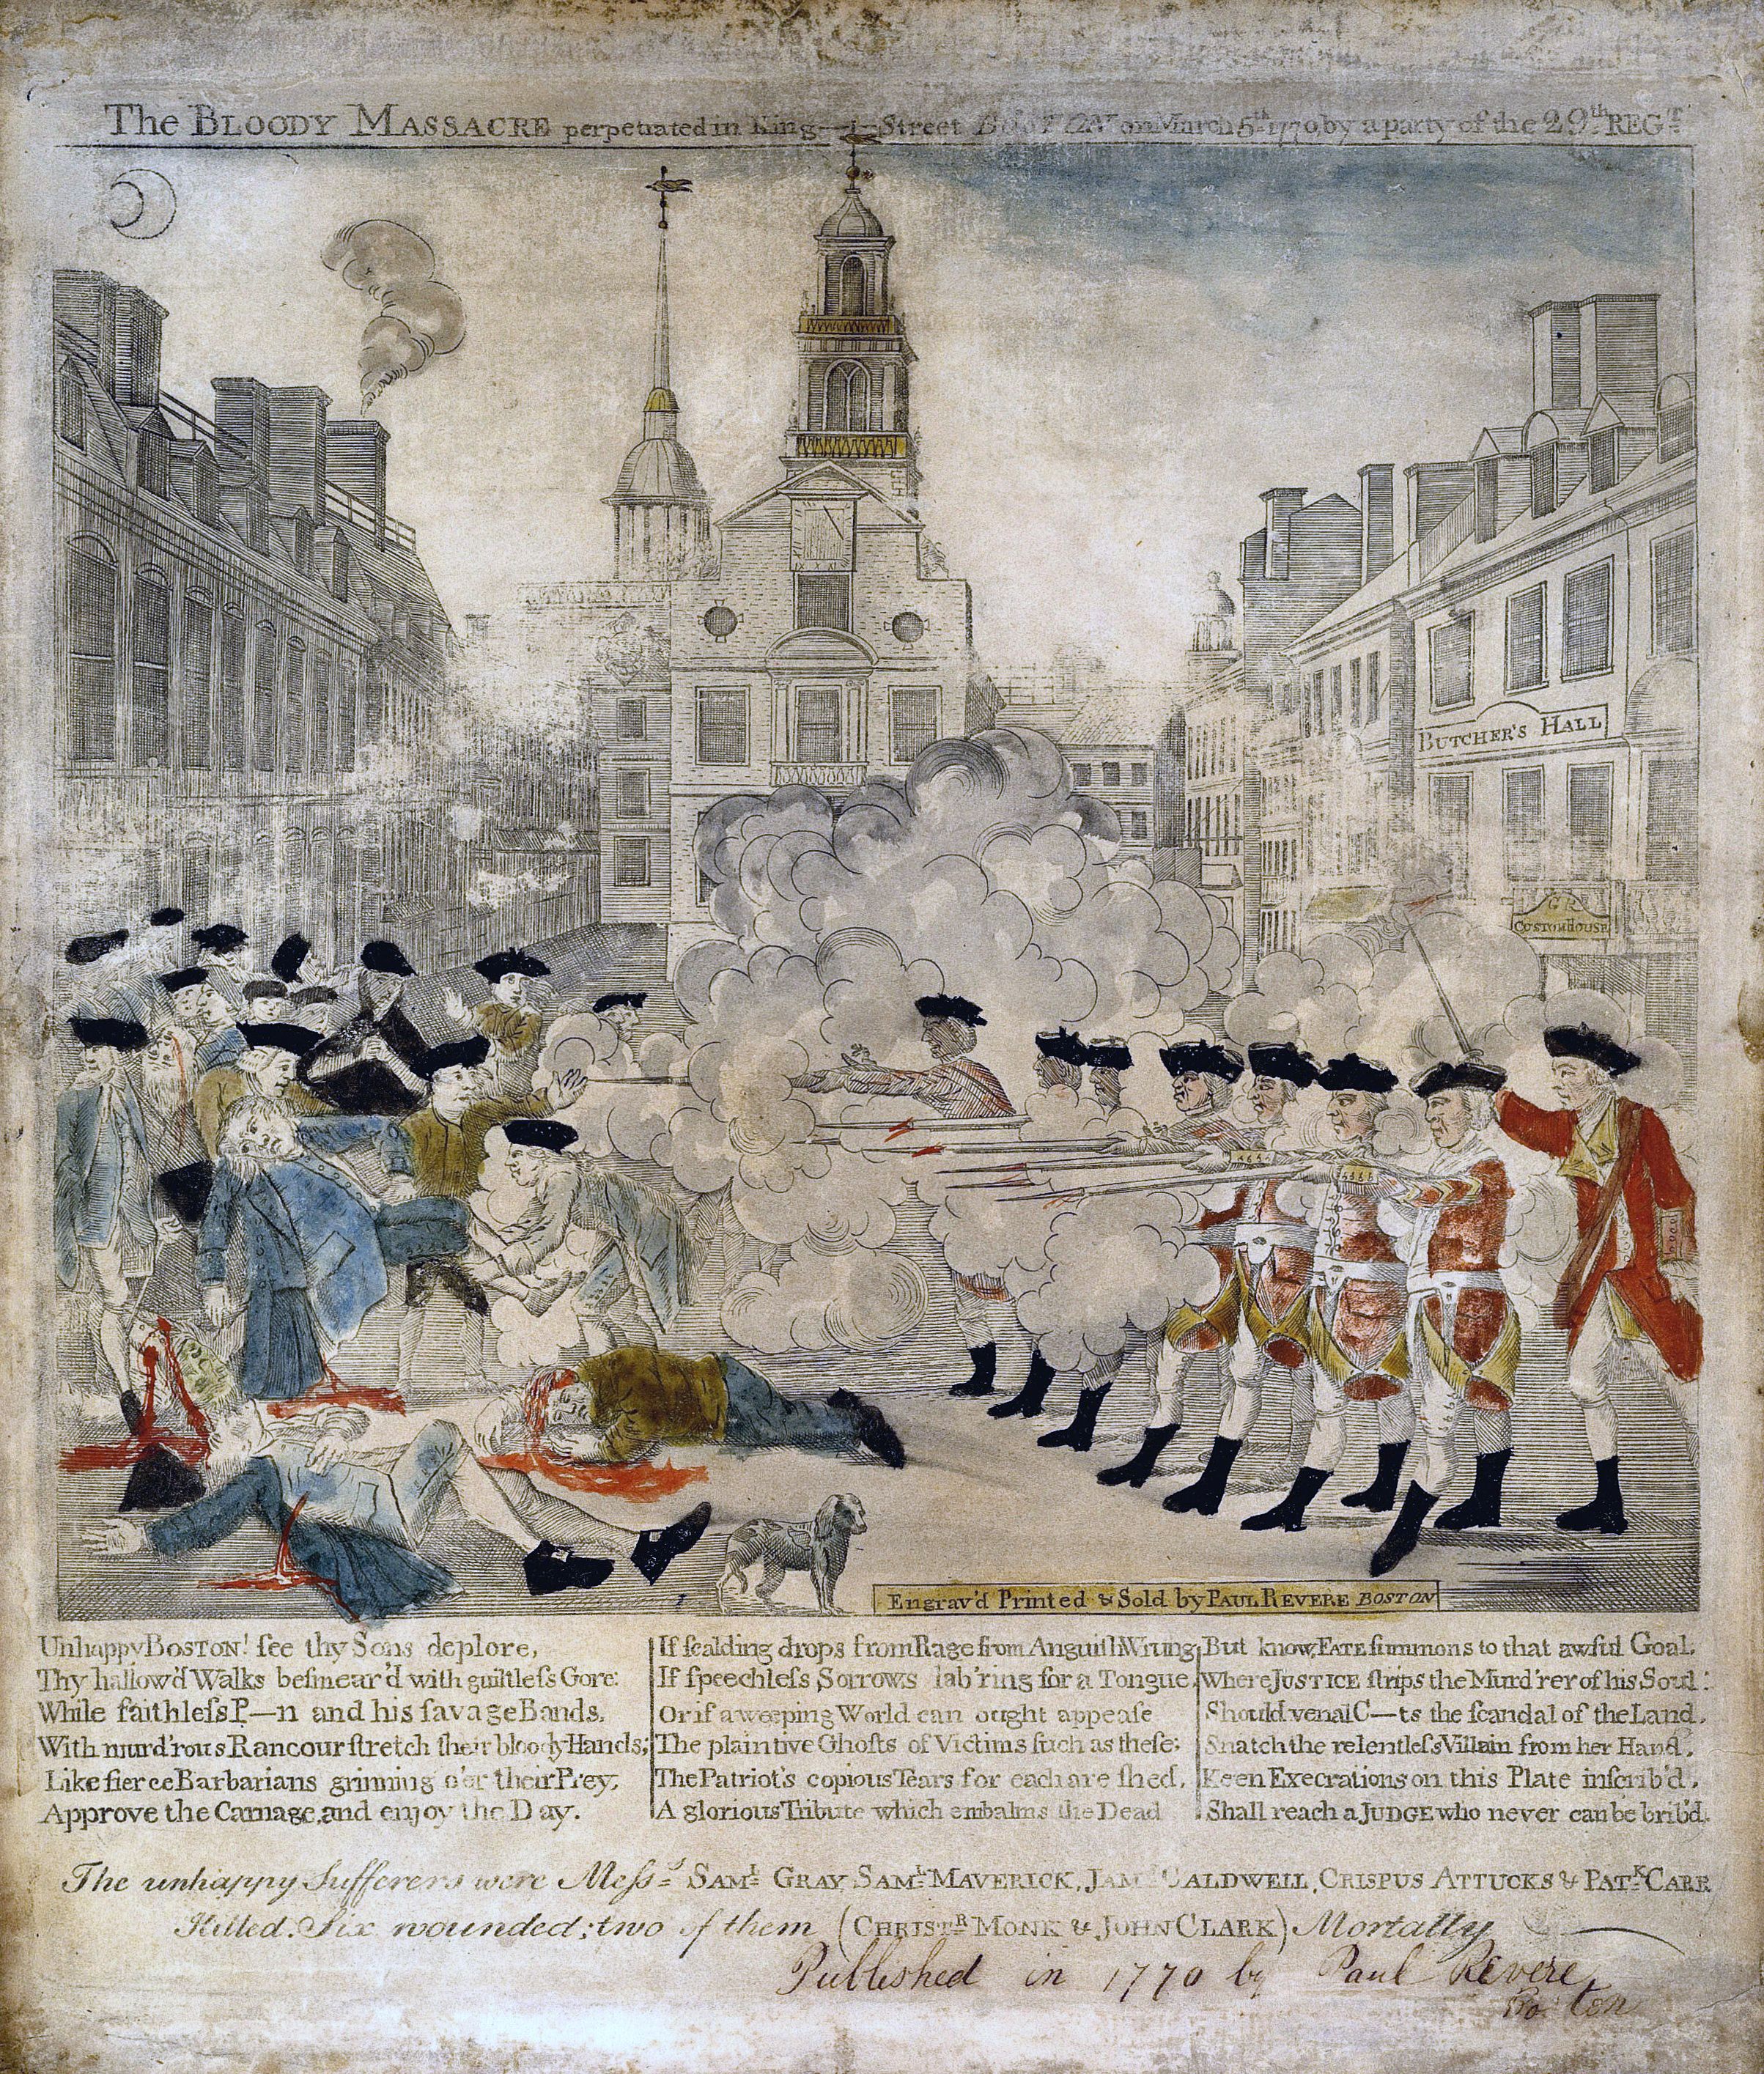 what was the impact of the boston massacre